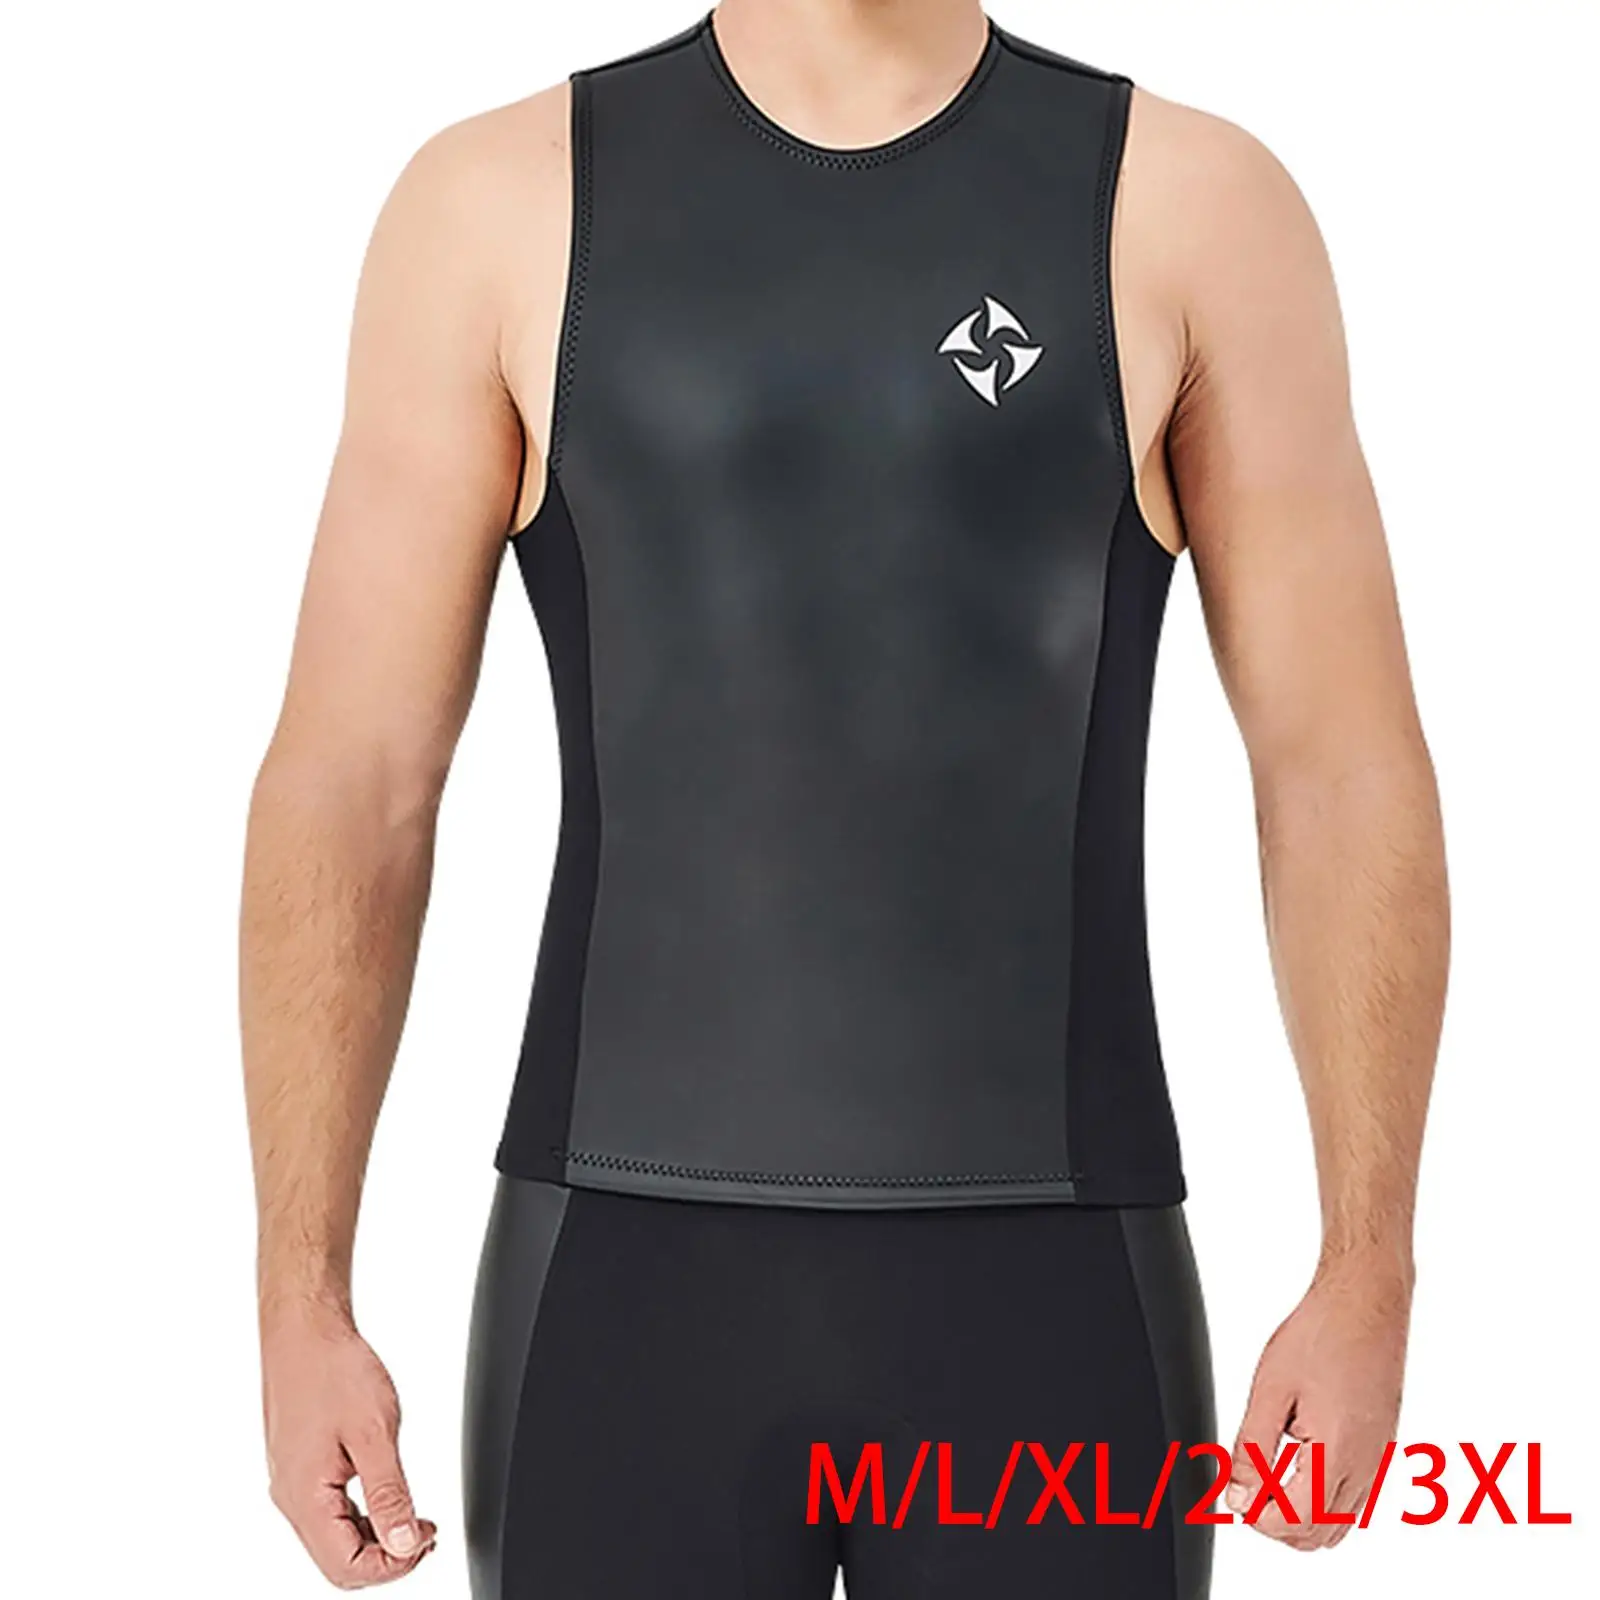 Outdoor Mens Wetsuits 2MM Neoprene Sleeveless Wetsuit Vest for Diving Surf